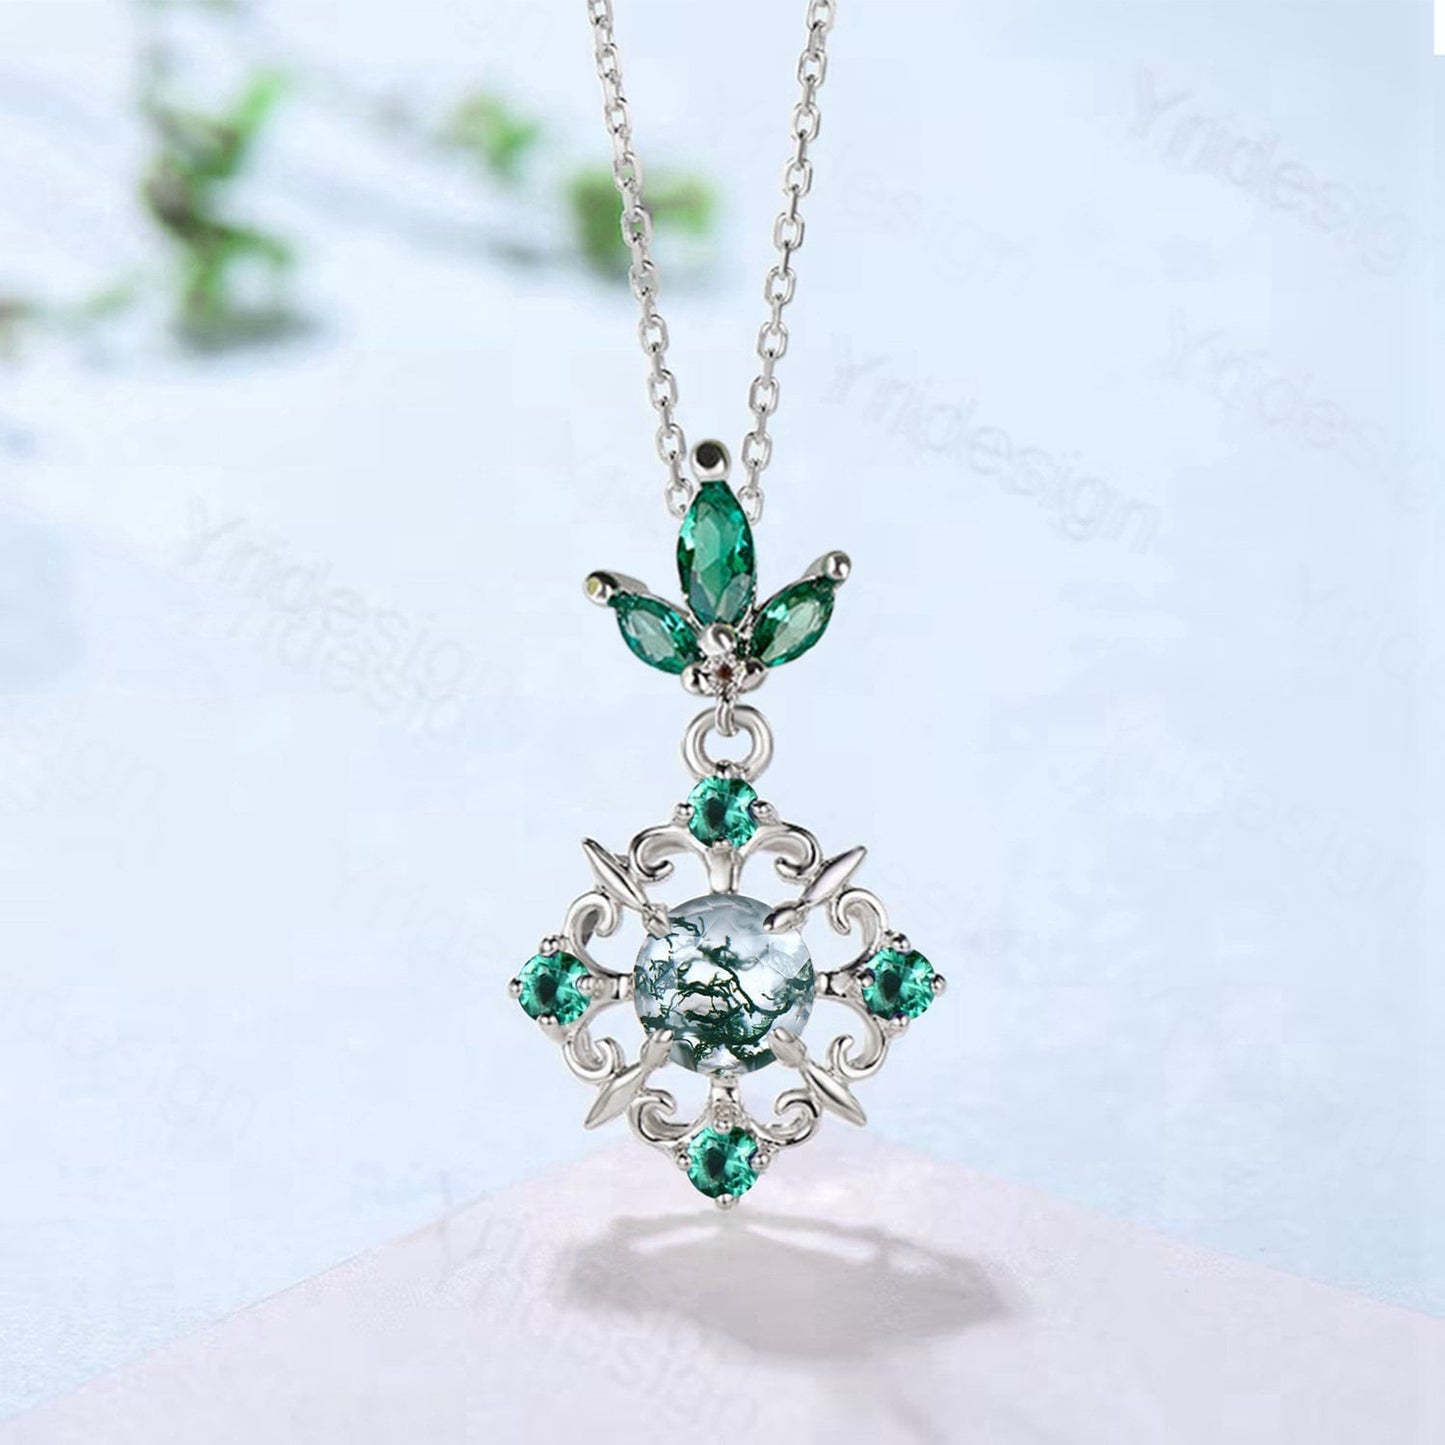 Vintage Moss Agate Pendant Necklace Unique Nature Inspired Green Agate Emerald Crystal Pendant 14K/18K Rose Gold Necklace Gift For Women - PENFINE